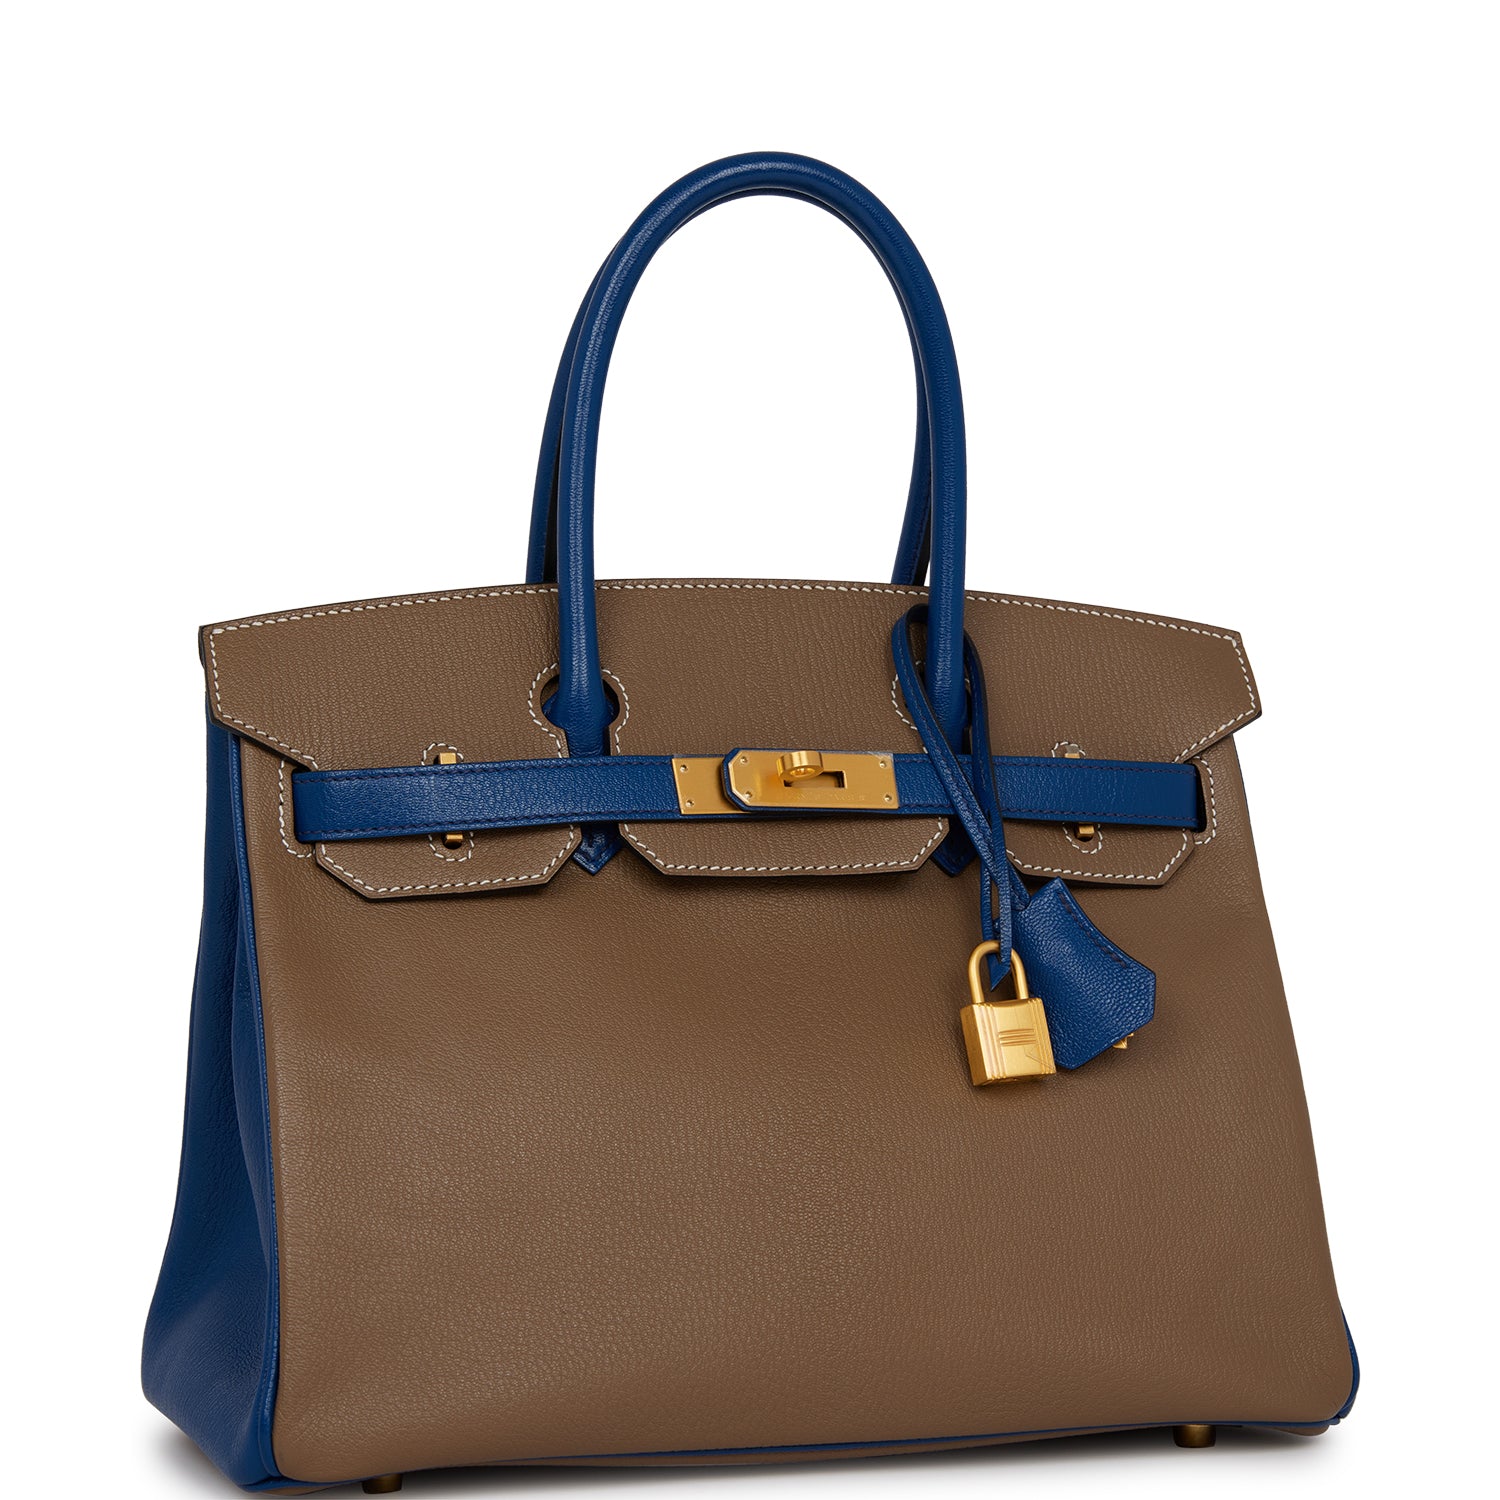 Top Quality Hermes Special Order (HSS) Birkin 30 Etoupe and Bleu Saphire Chevre Brushed Gold Hardware